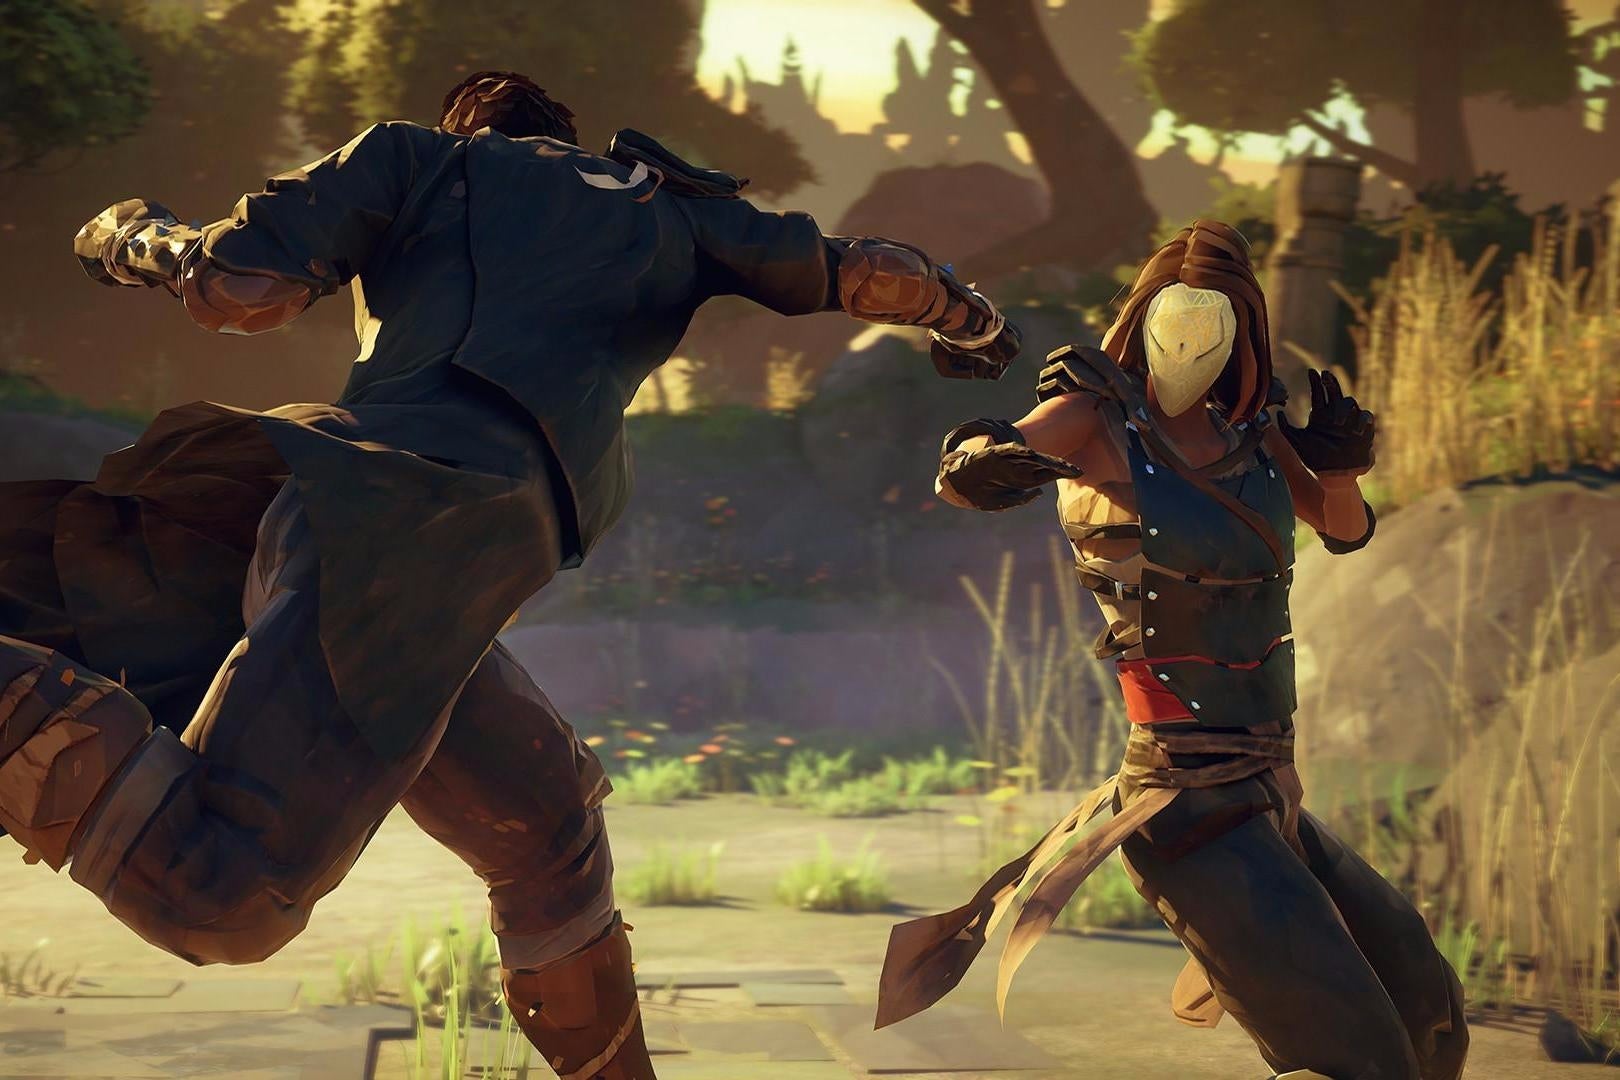 Image for Absolver 15-minute dev walkthrough looks like For Honor meets God Hand